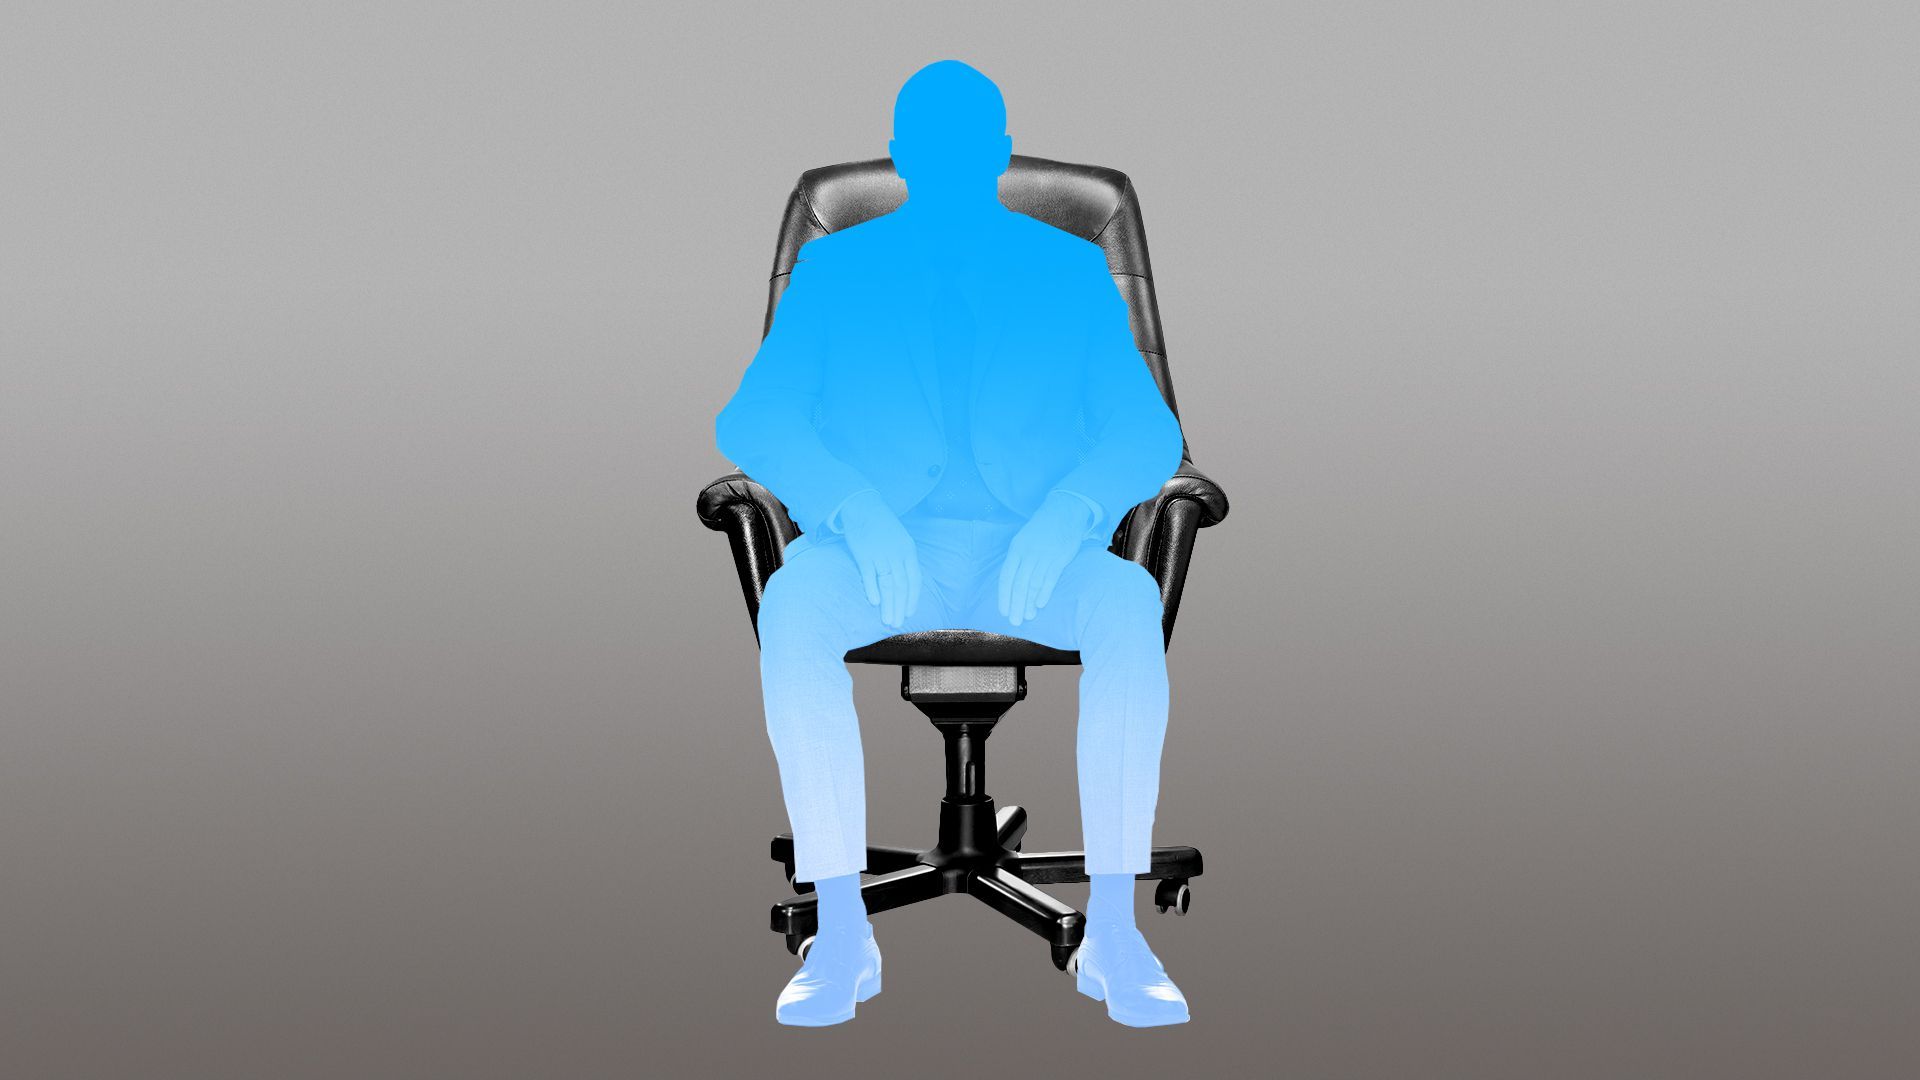 Illustration of a fading silhouette of a suited person on an office chair